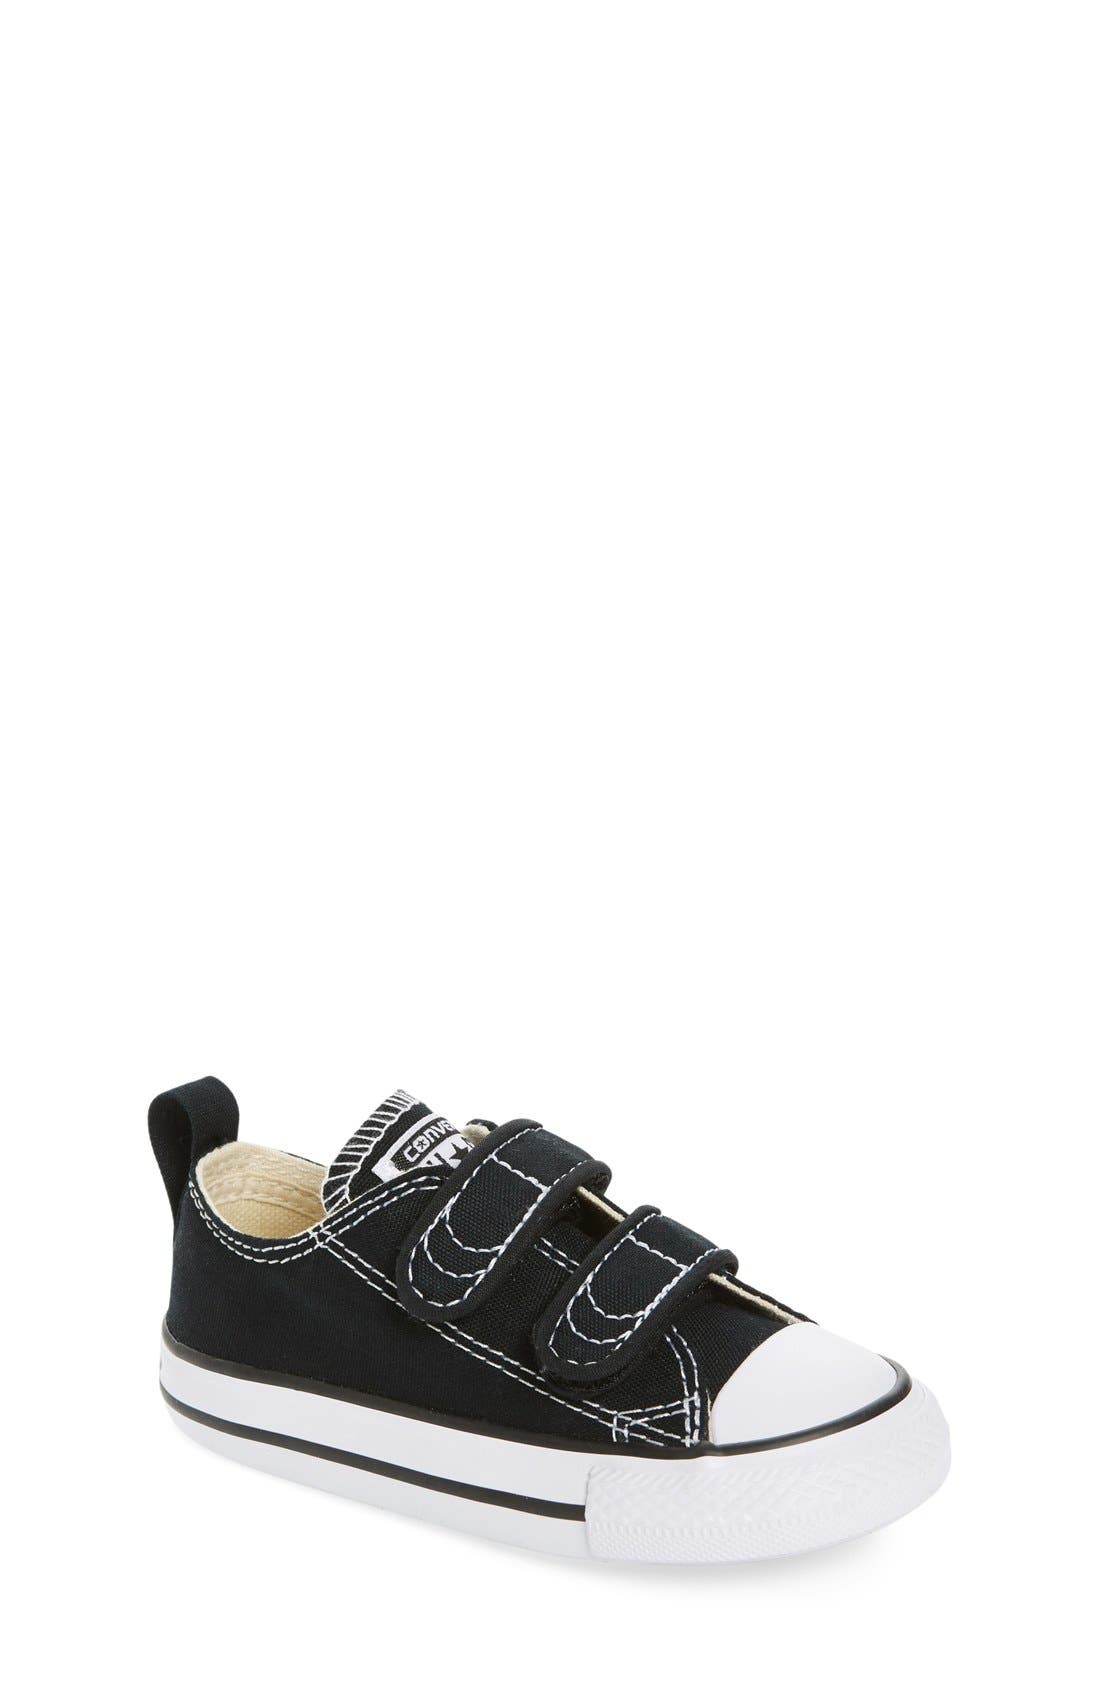 converse baby sandals